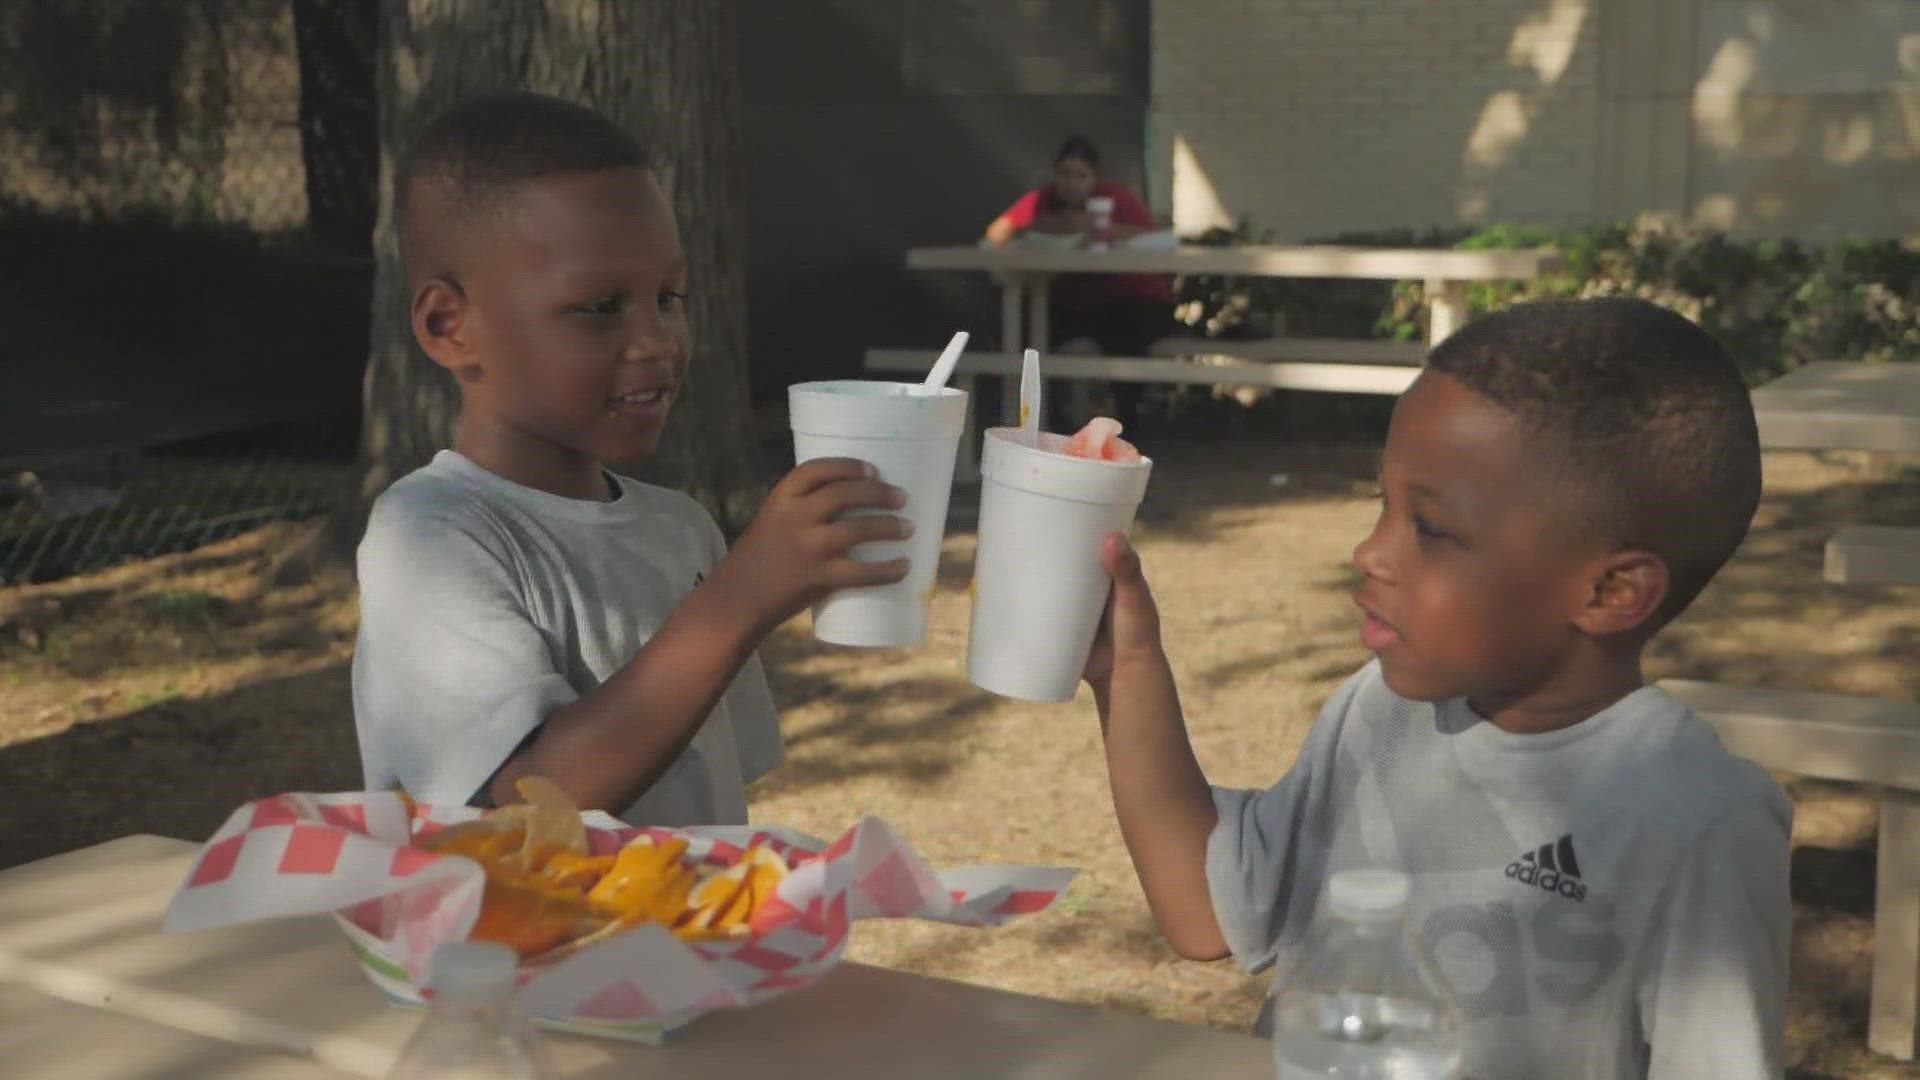 Taurus, 6, and his brother Elijah, 5, spent the day at the State Fair of Texas. They said they hope the next time they go, their parents will bring them.